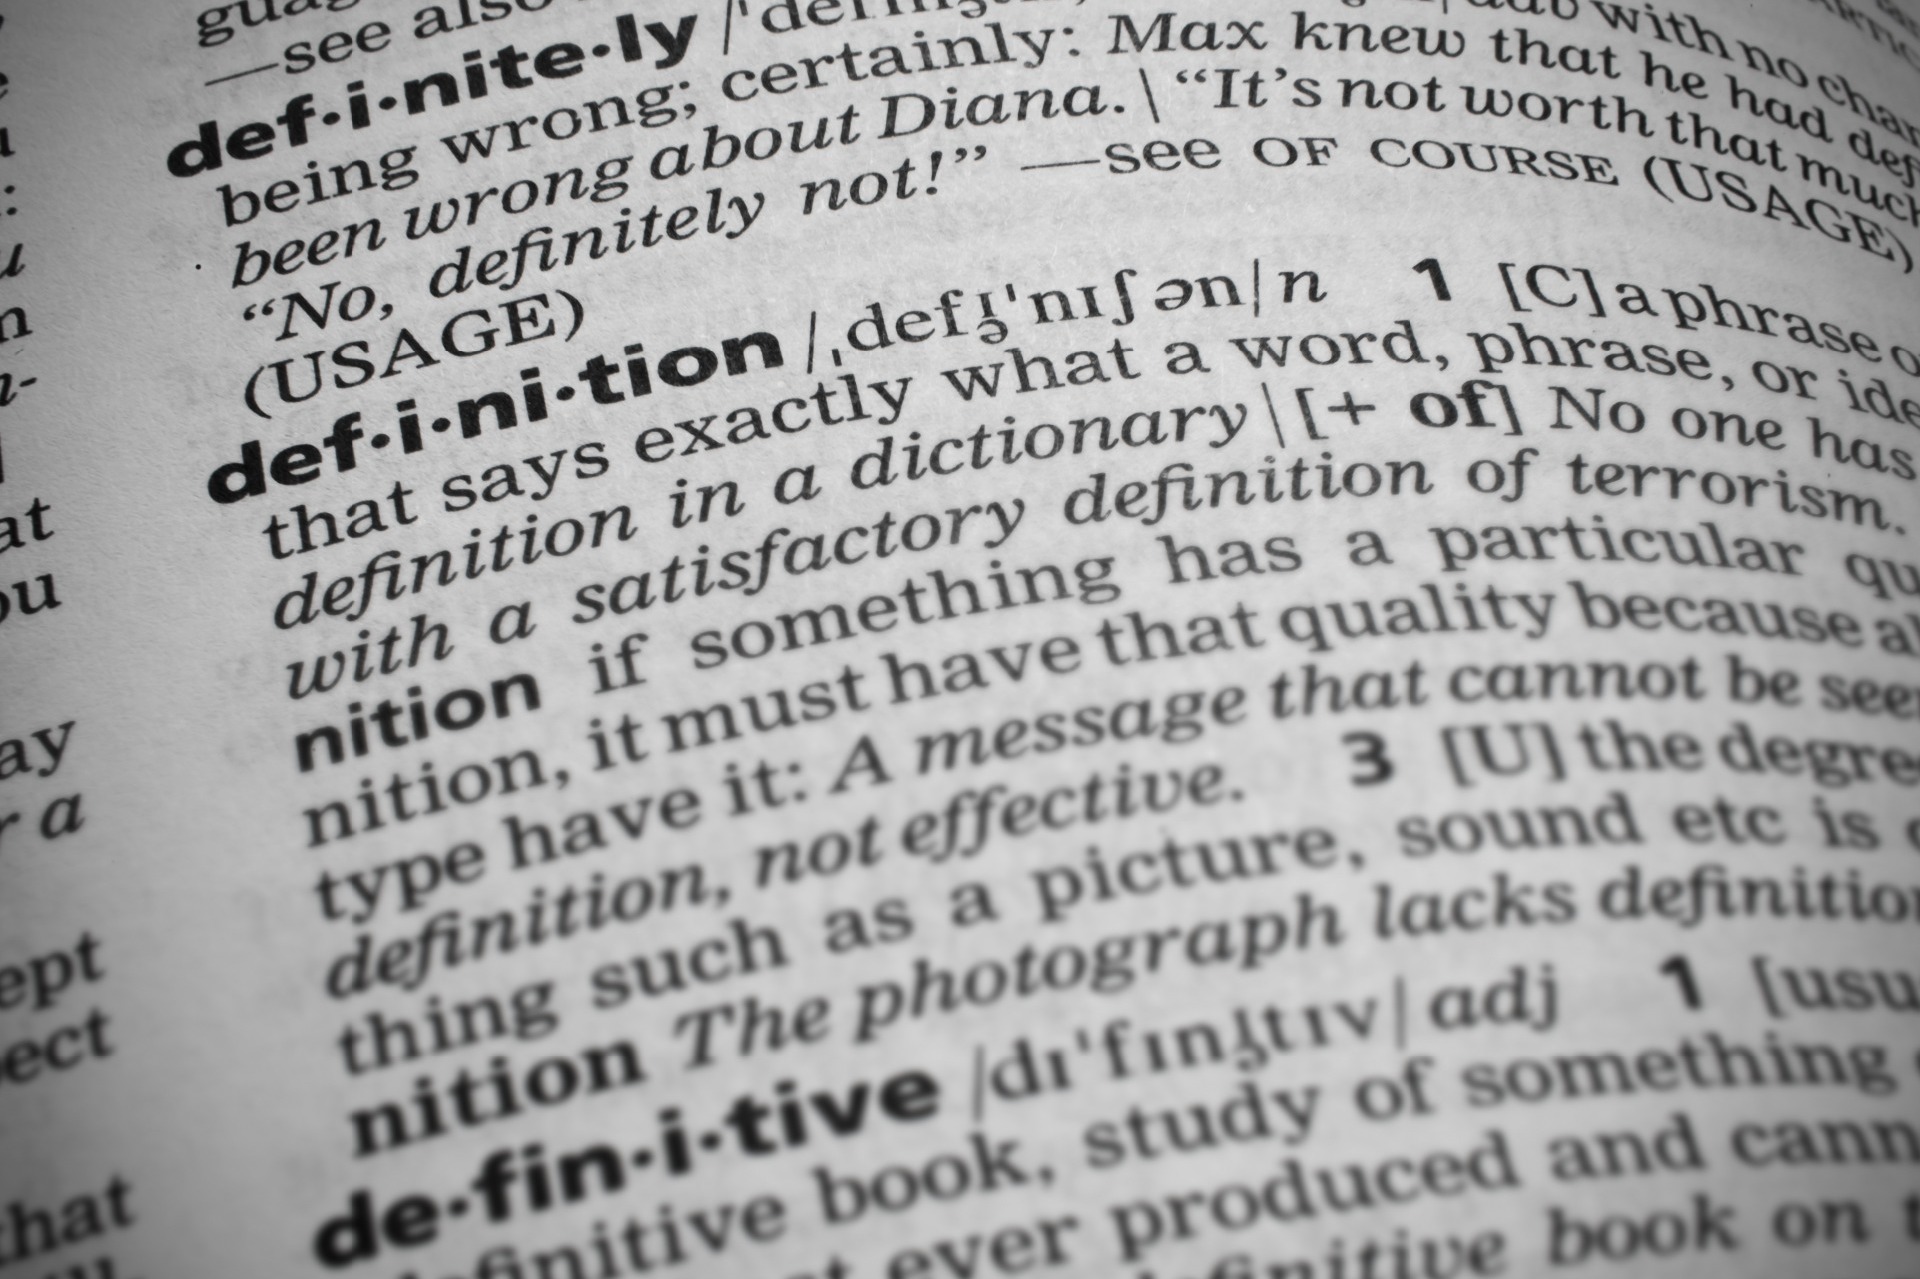 A Dictionary showing a Definition of the word Definition.